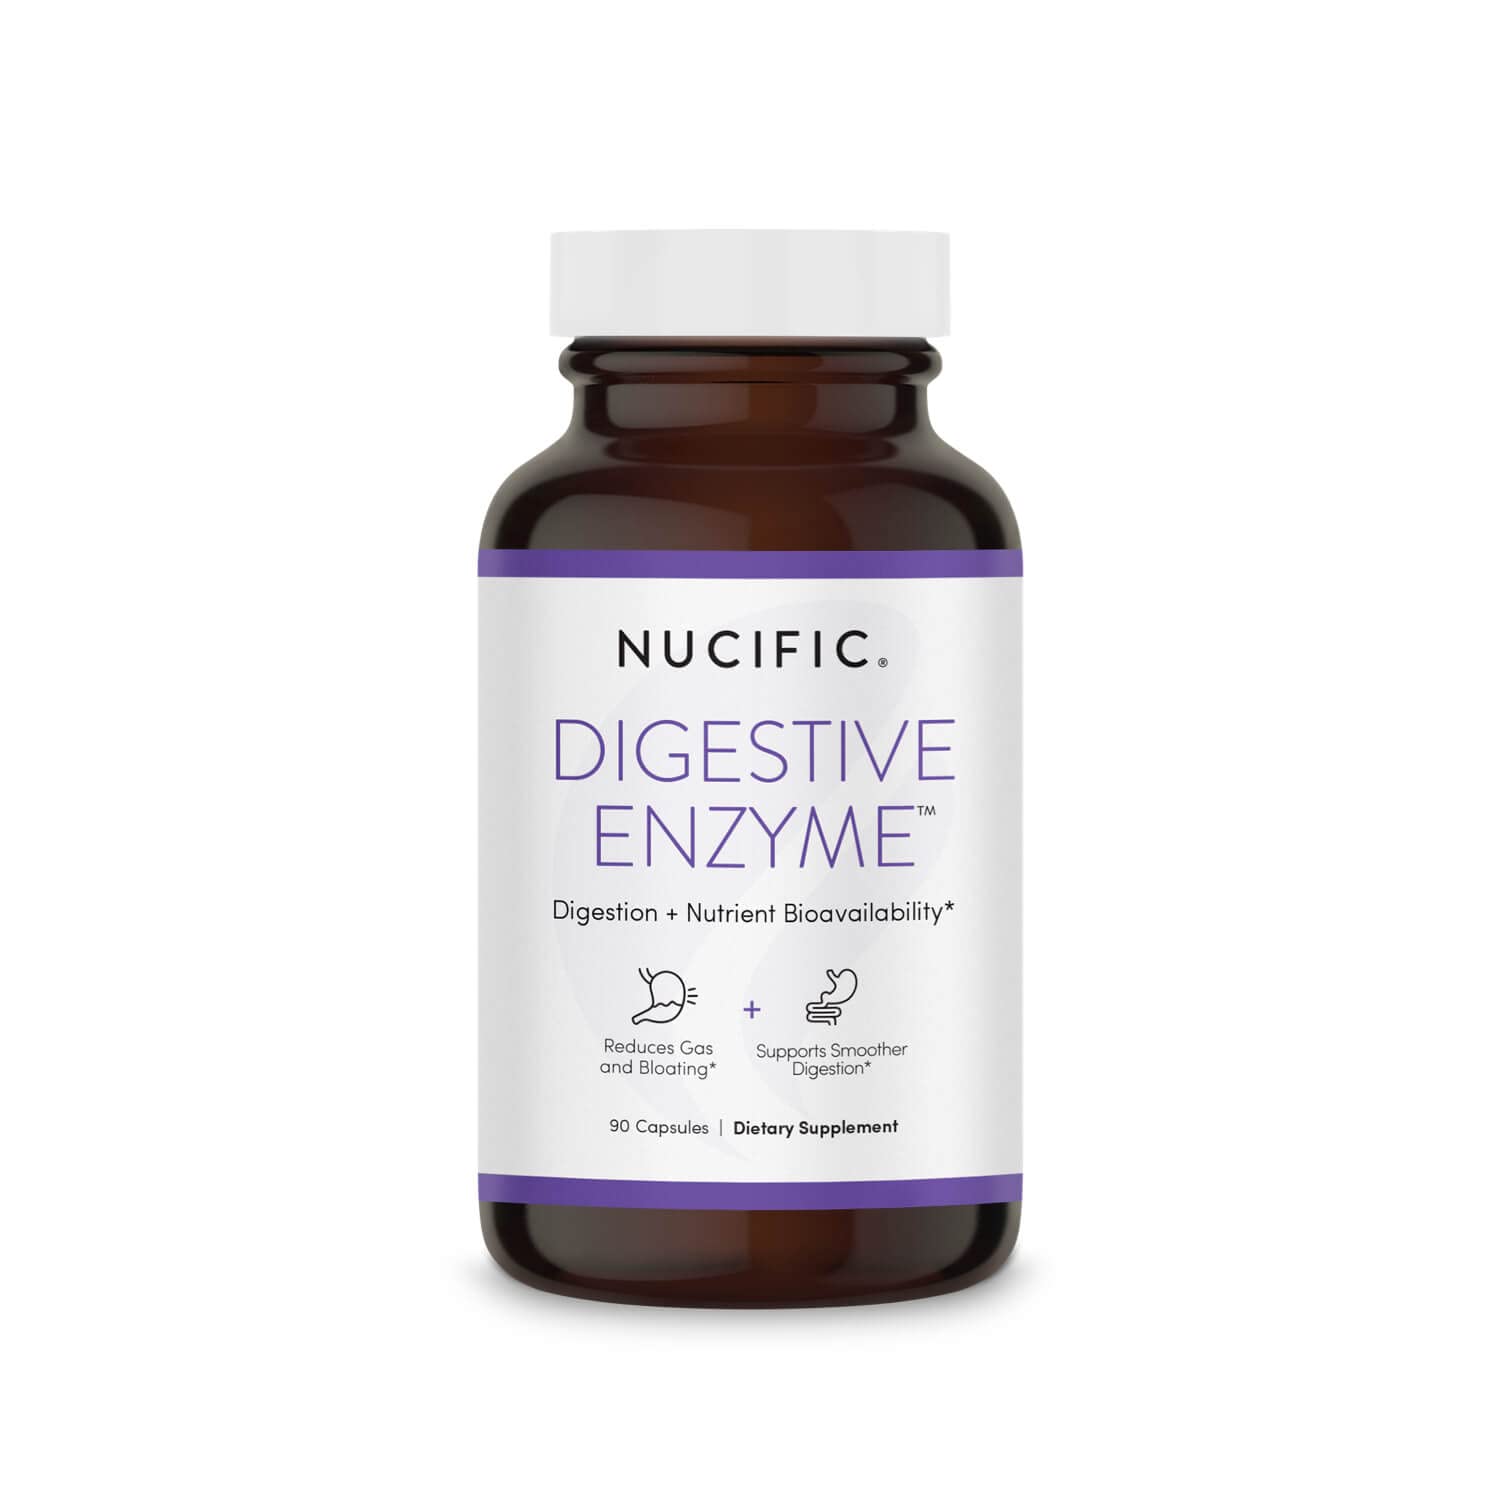 Nucific Digestive Enzyme Supplement to Support Digestion and Nutrient Bioavailability, 90 Count